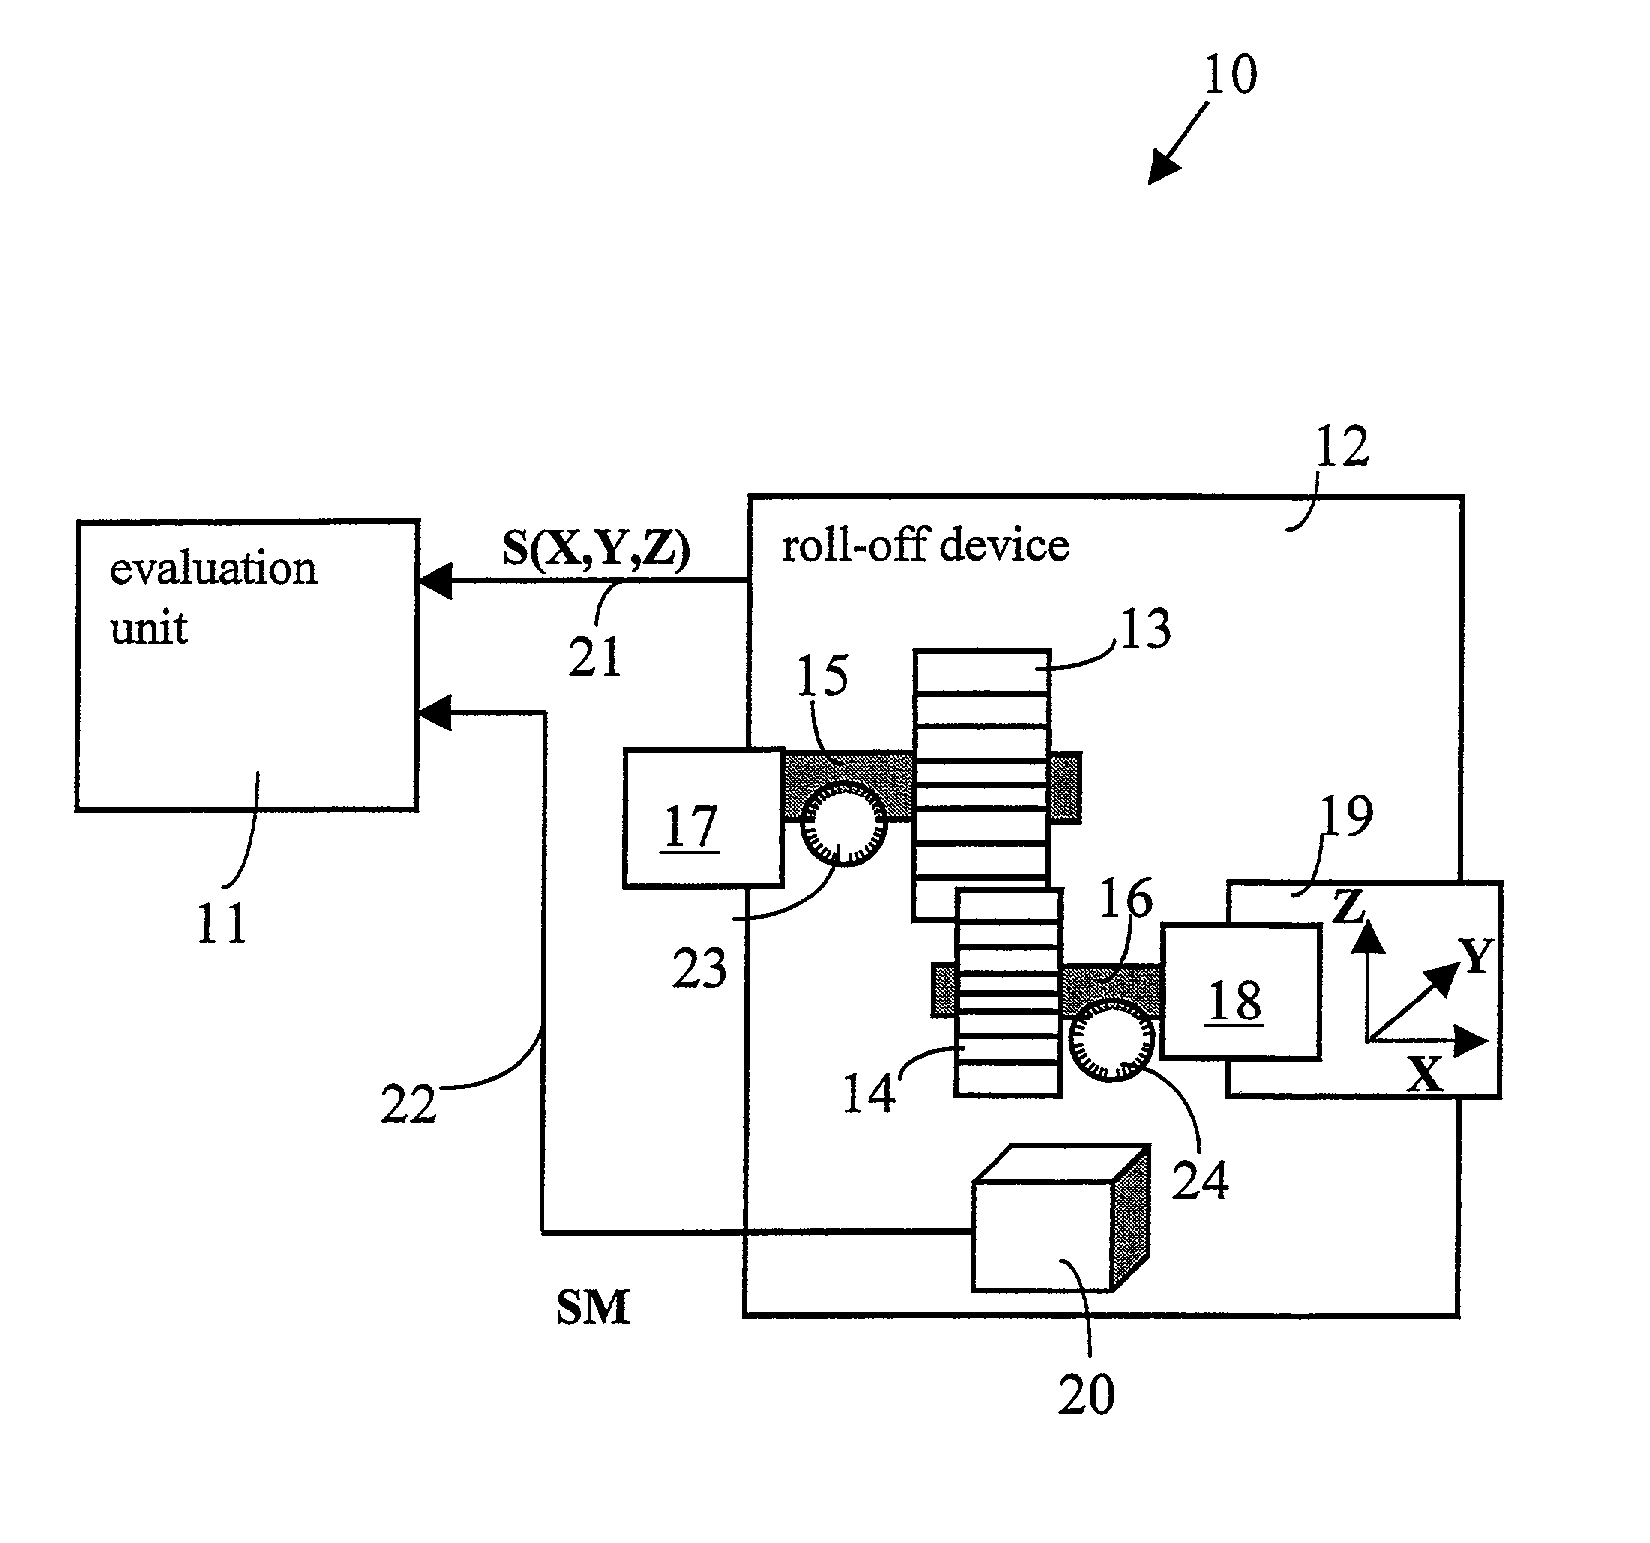 Continuous measurement for determining a suitable mounting position or for quality-testing of gear sets